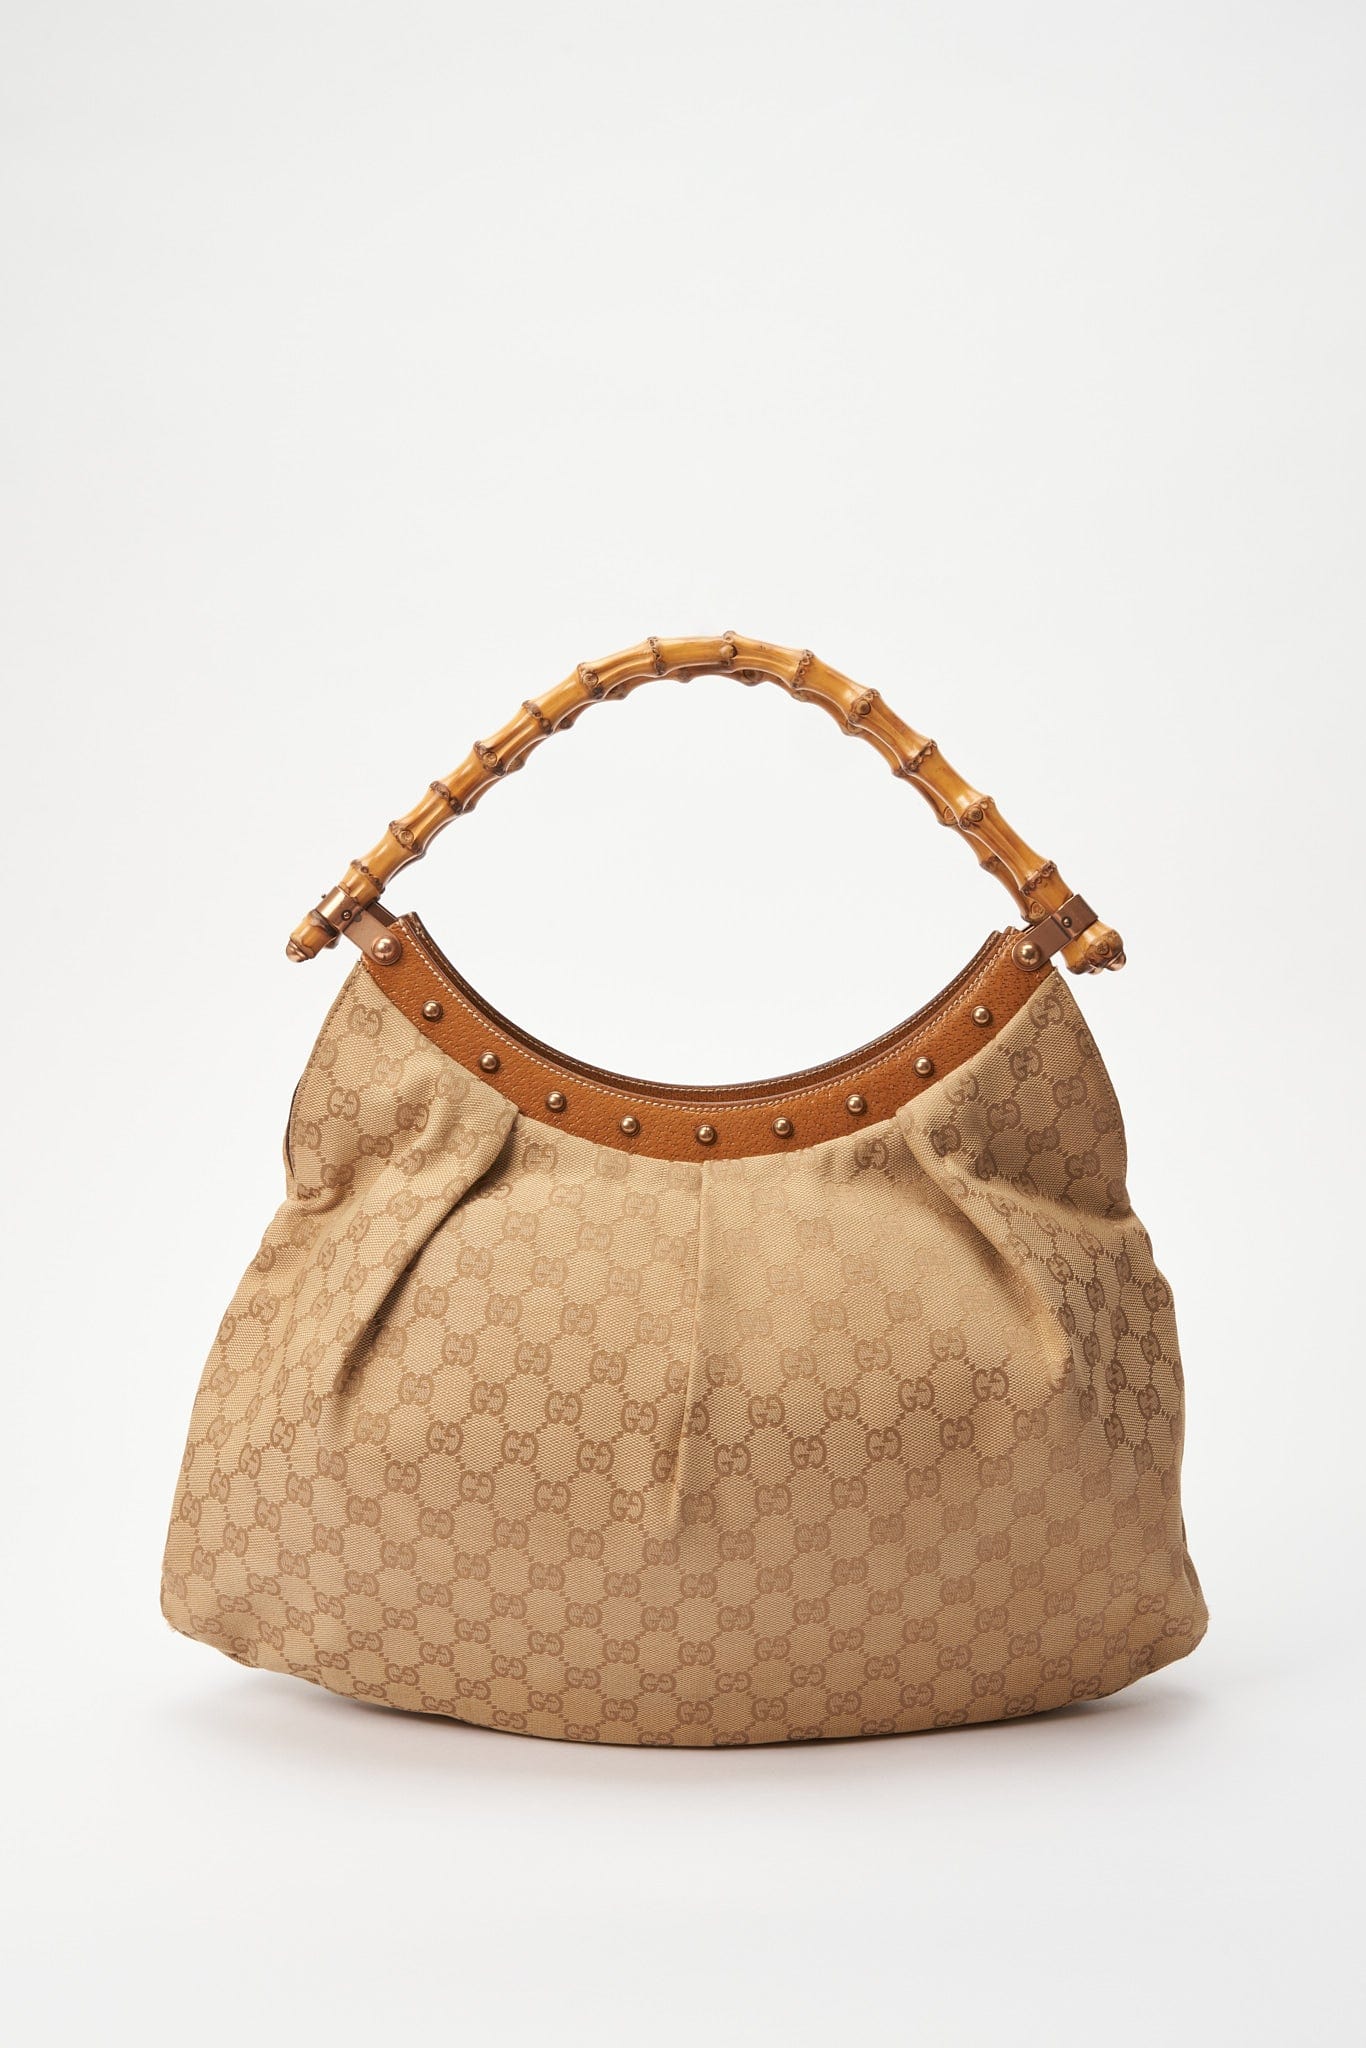 Vintage Gucci Bag with Bamboo Handle - Beige Canvas – The Hosta